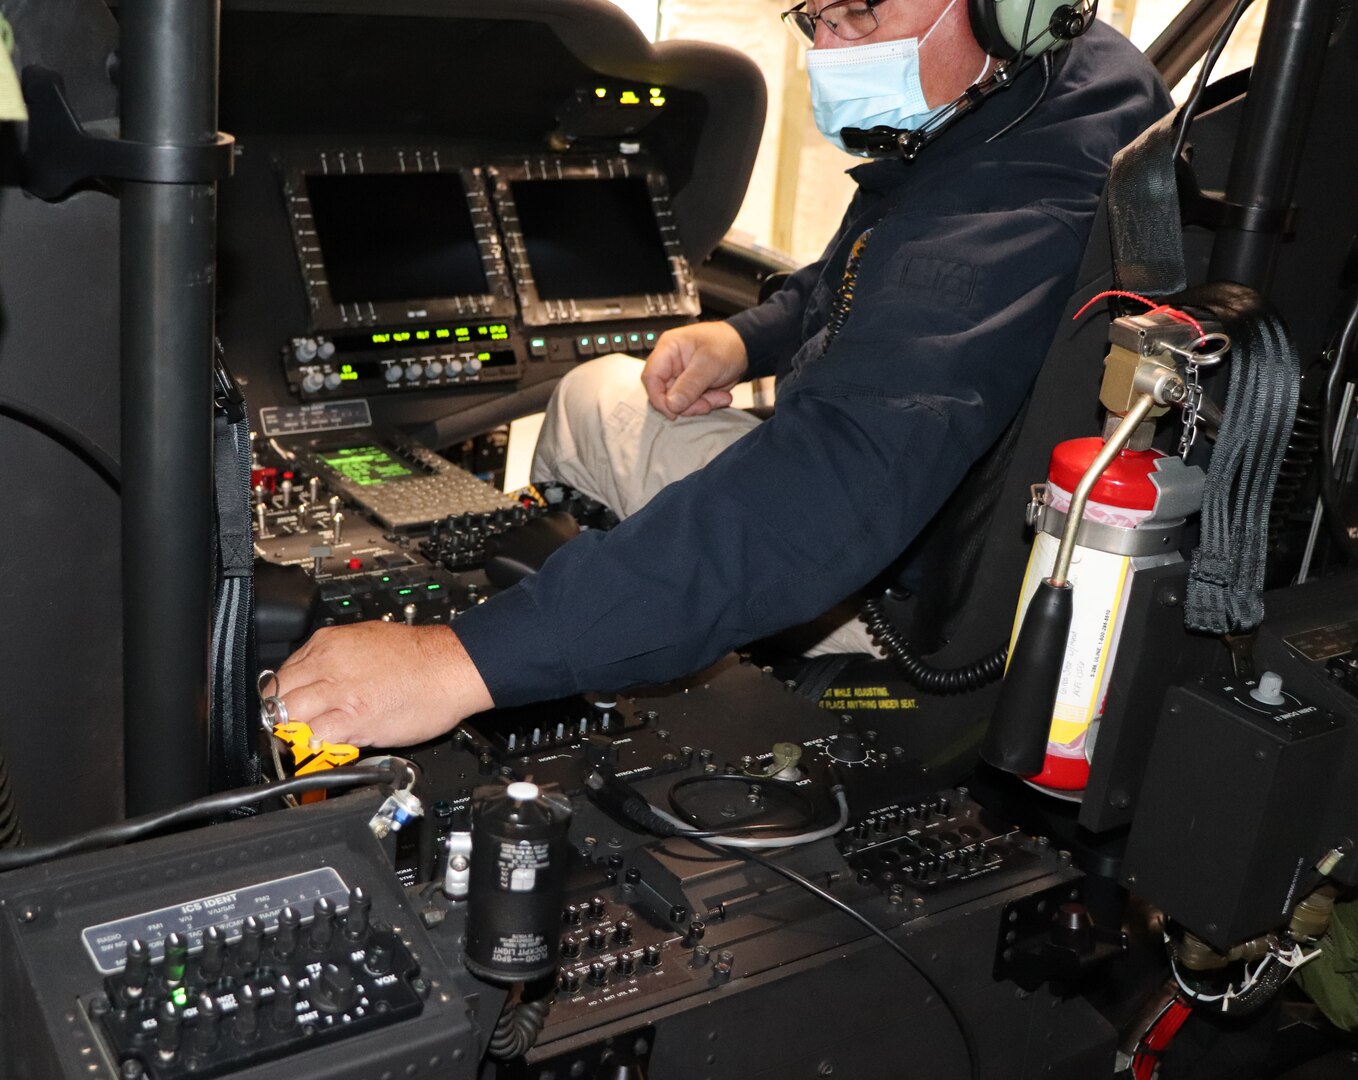 Lawrence Mitchell, a radio engineer from the New York State Office of Office of Interoperable and Emergency Communications, verifies the operation of a UH-60 radio by using the aircraft headset to conduct a radio test with another engineer on a portable radio at the Army Aviation Support Facility in Latham, New York, Sept. 30, 2020. Teams from the office uploaded civilian emergency response channels onto radios on all New York National Guard helicopters.